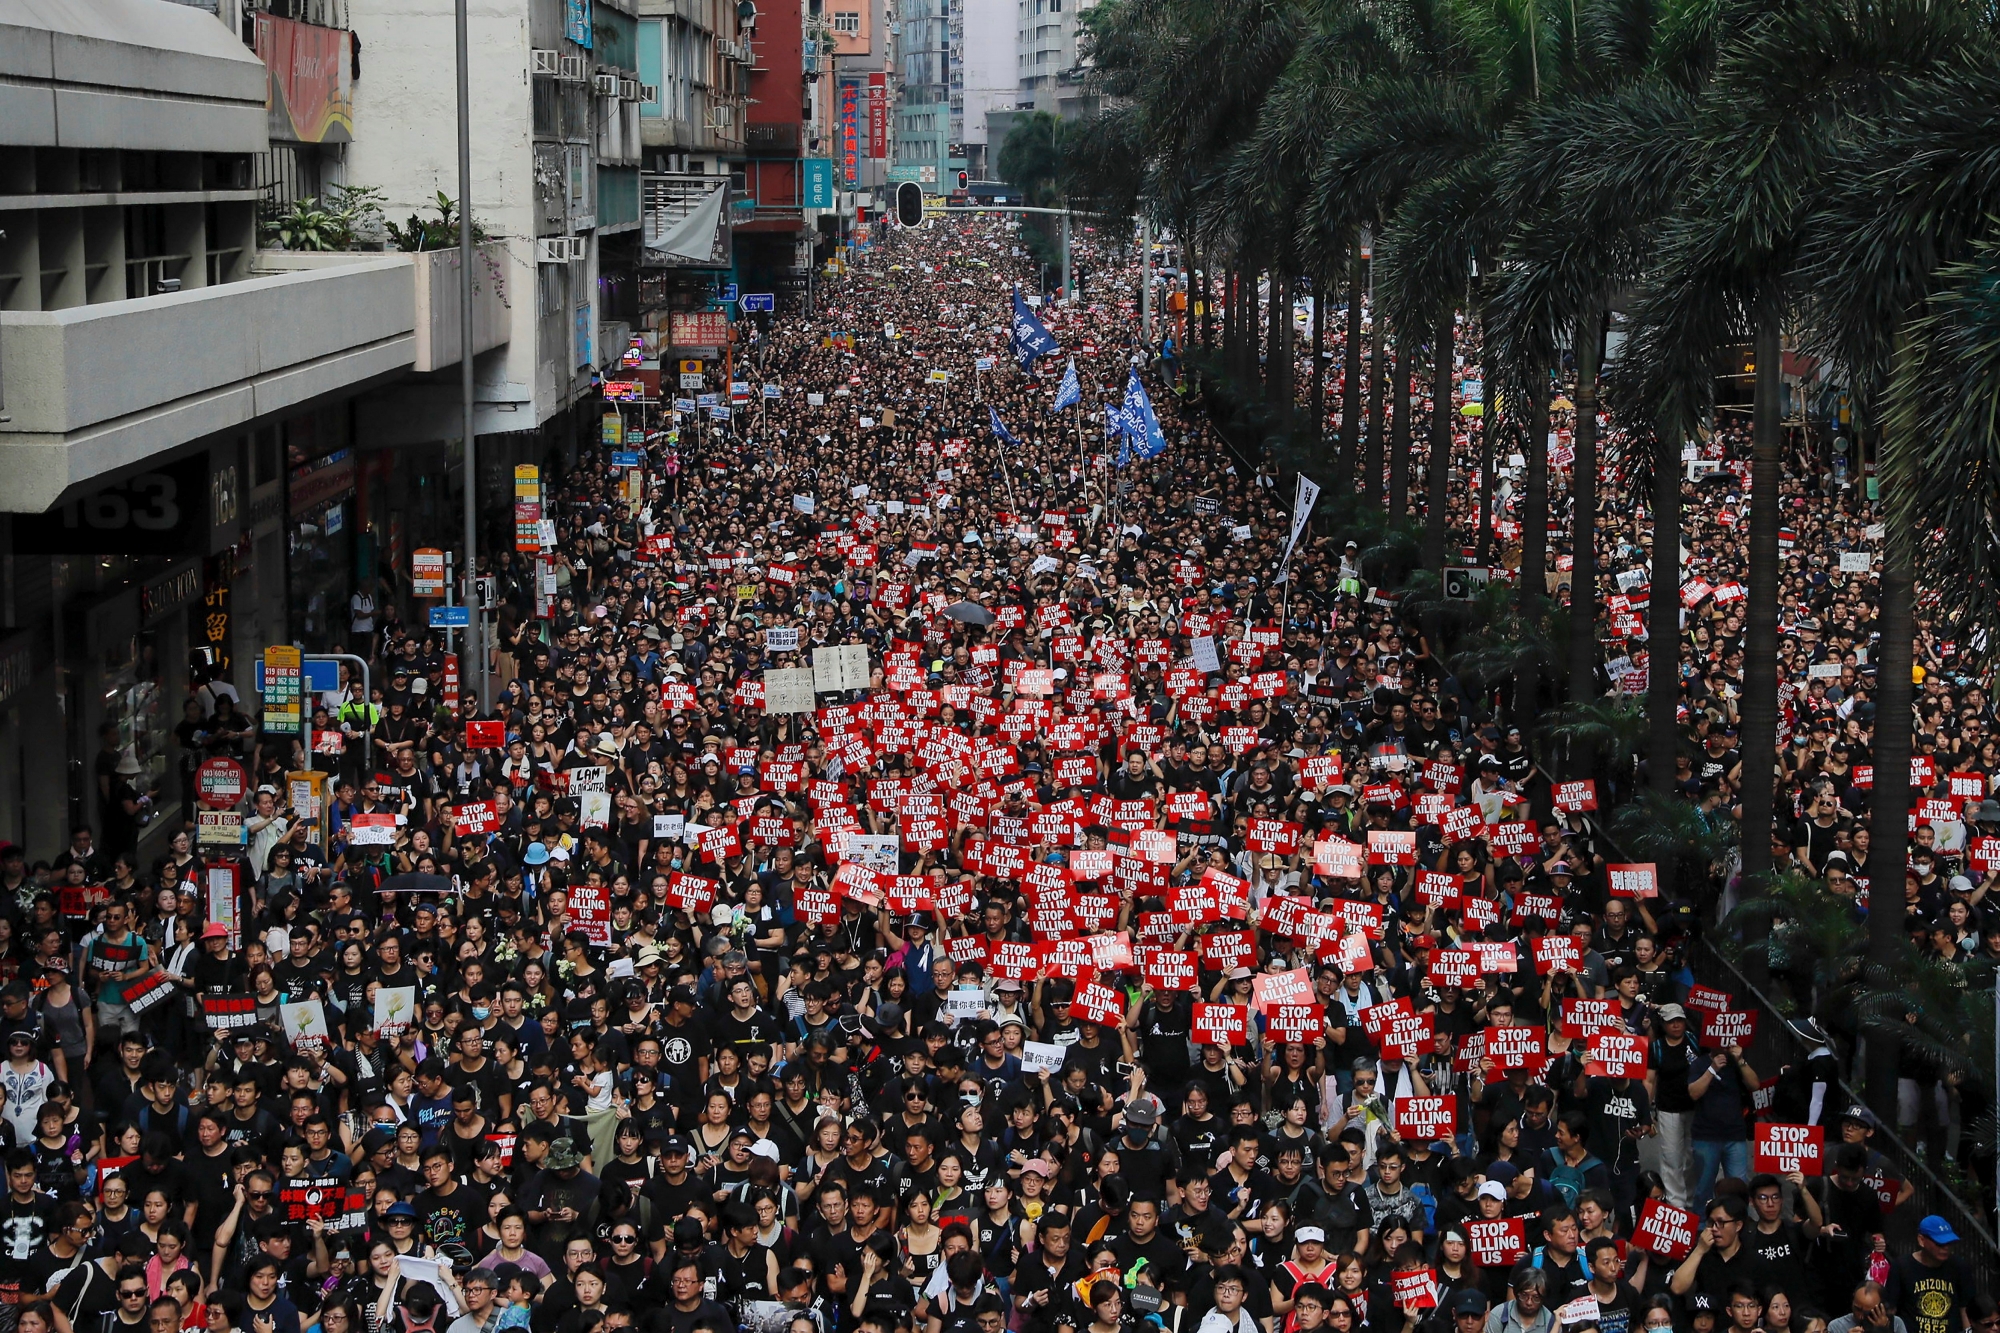 Tens of thousands of protesters carry posters and banners march through the streets as they continue to protest an extradition bill, Sunday, June 16, 2019, in Hong Kong. Hong Kong residents Sunday continued their massive protest over an unpopular extradition bill that has highlighted the territory's apprehension about relations with mainland China, a week after the crisis brought as many as 1 million into the streets. (AP Photo/Kin Cheung) Hong Kong Extradition Law